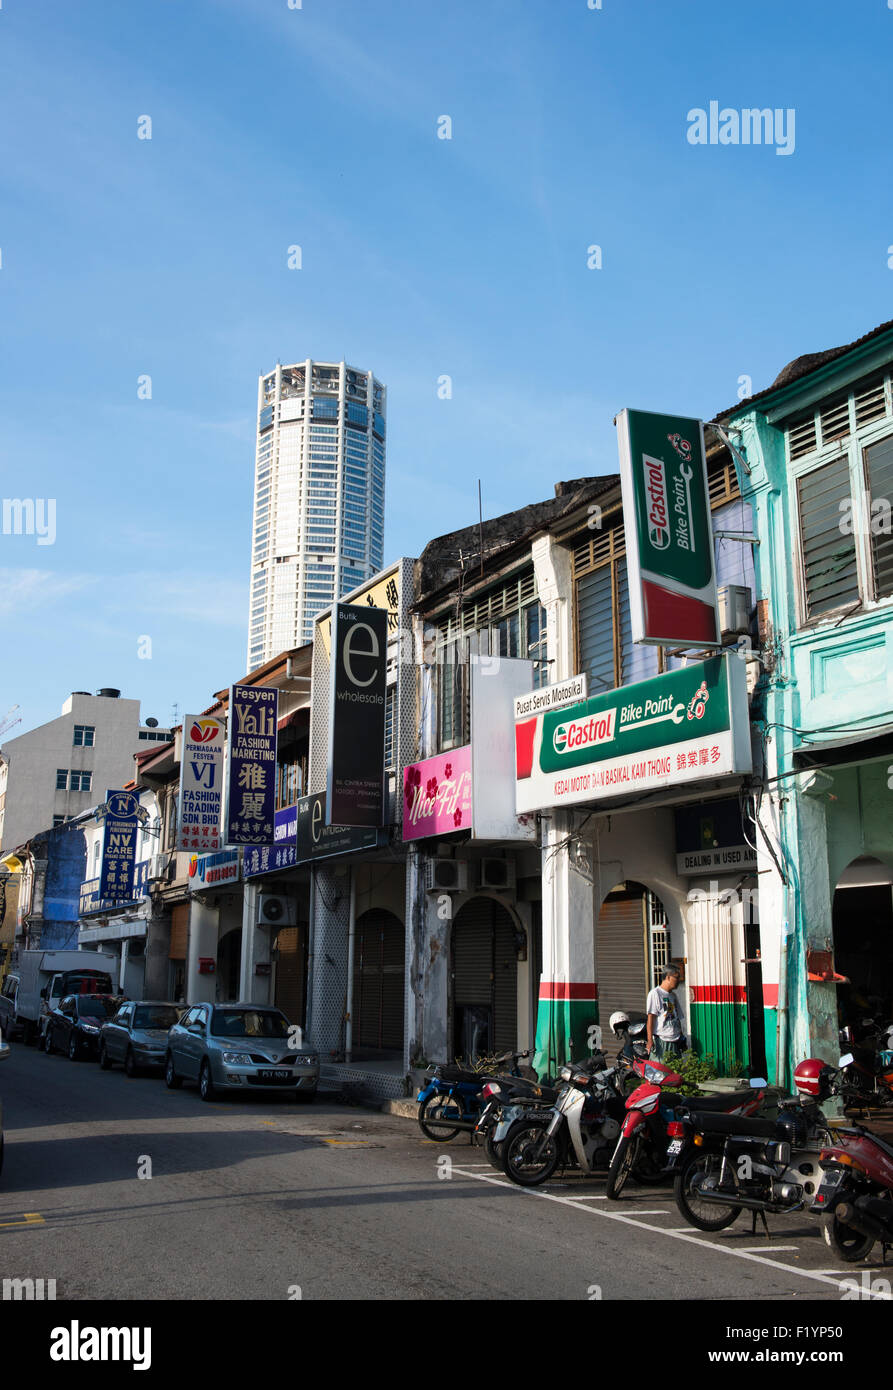 The center of old Georgetown- traditional old buildings with the Komtar tower behind them. Stock Photo